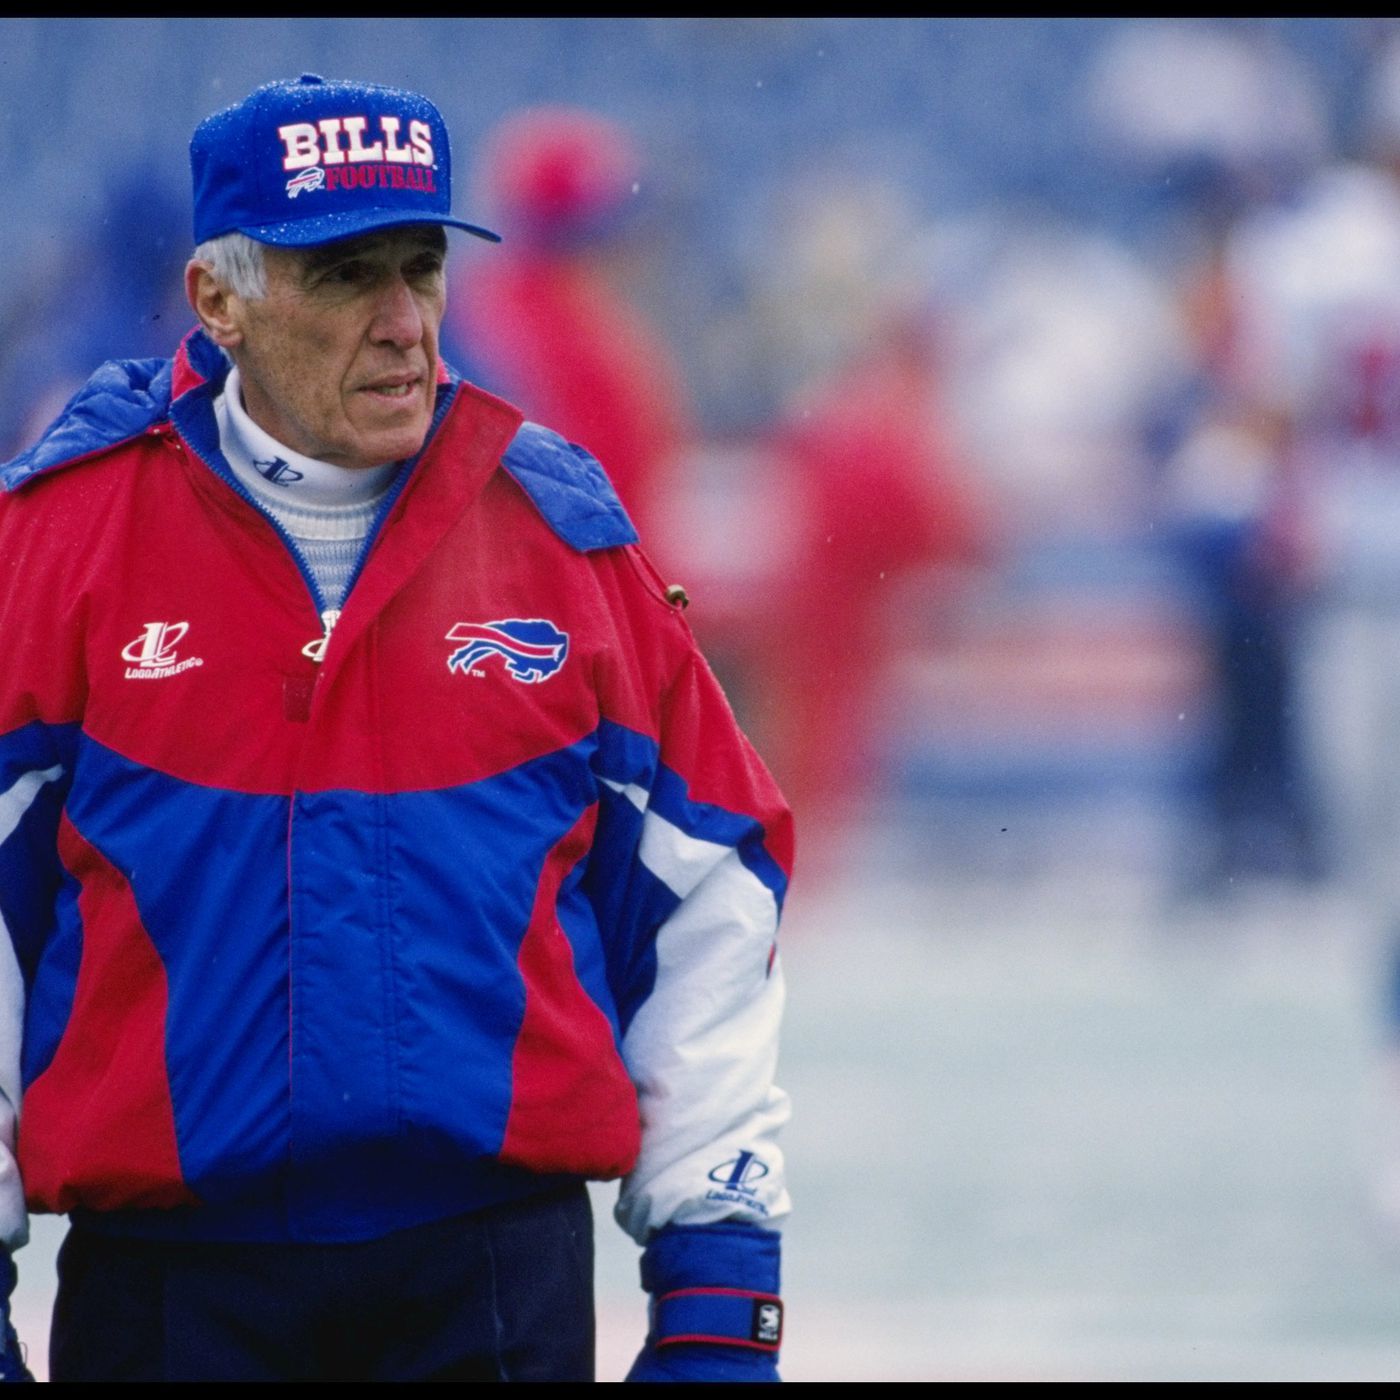 Rig mand Konklusion diskriminerende August 4, 2001: Marv Levy Enters The Hall Of Fame - Buffalo Rumblings